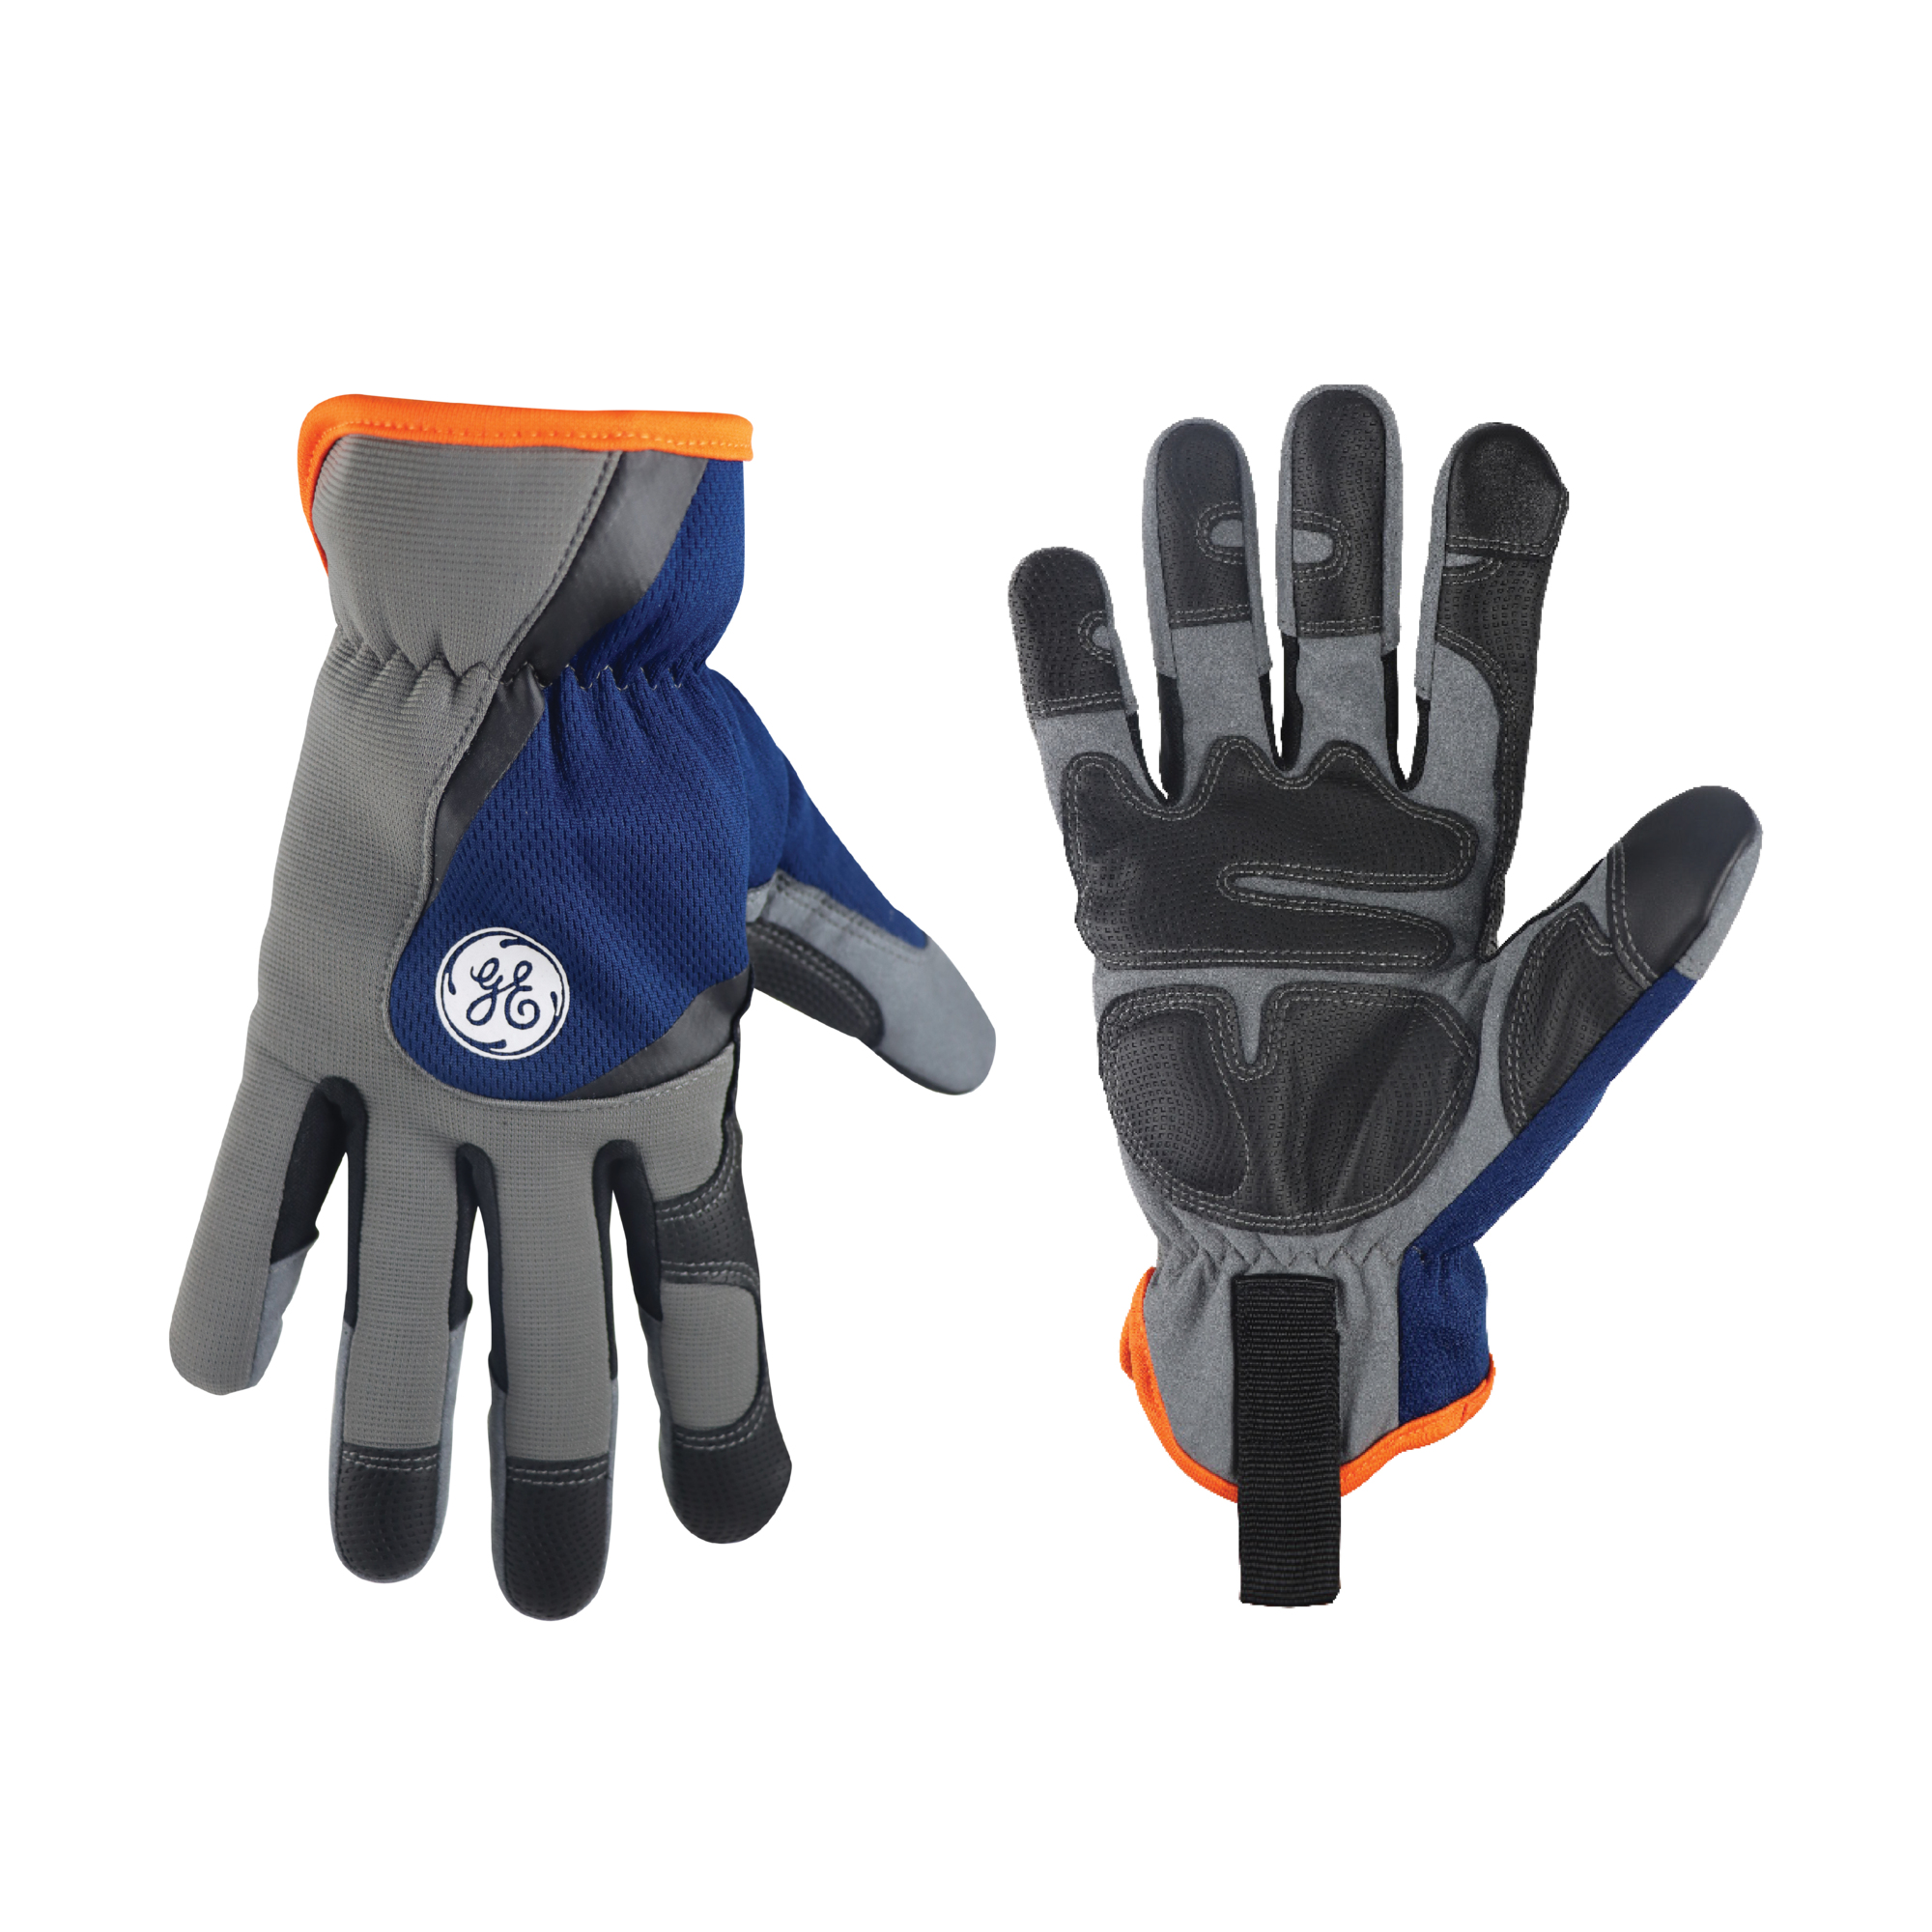 General Electric, Pro Mechanic's Glove Multicolor M 1 pair, Size M, Included (qty.) 1, Model GG410MC